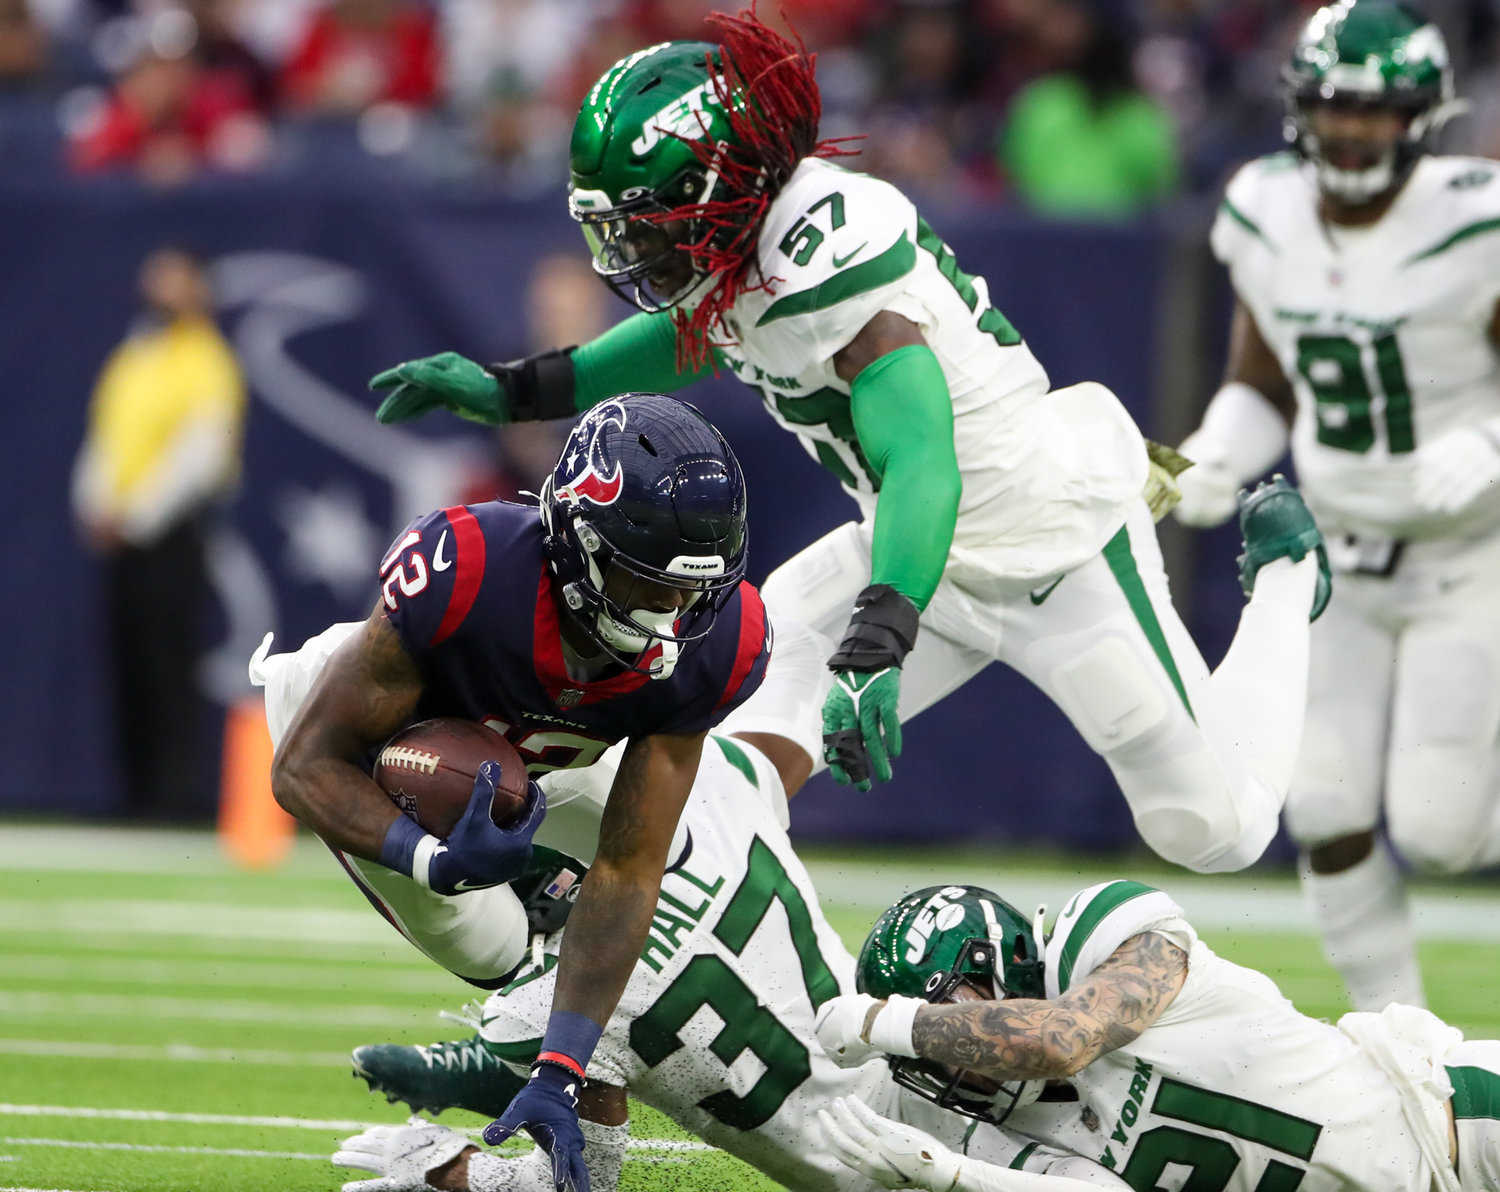 Houston Texans wide receiver Nico Collins (12) is tackled during an NFL game between the Houston Texans and the New York Jets on November 28, 2021 in Houston, Texas. The Jets won, 21-14